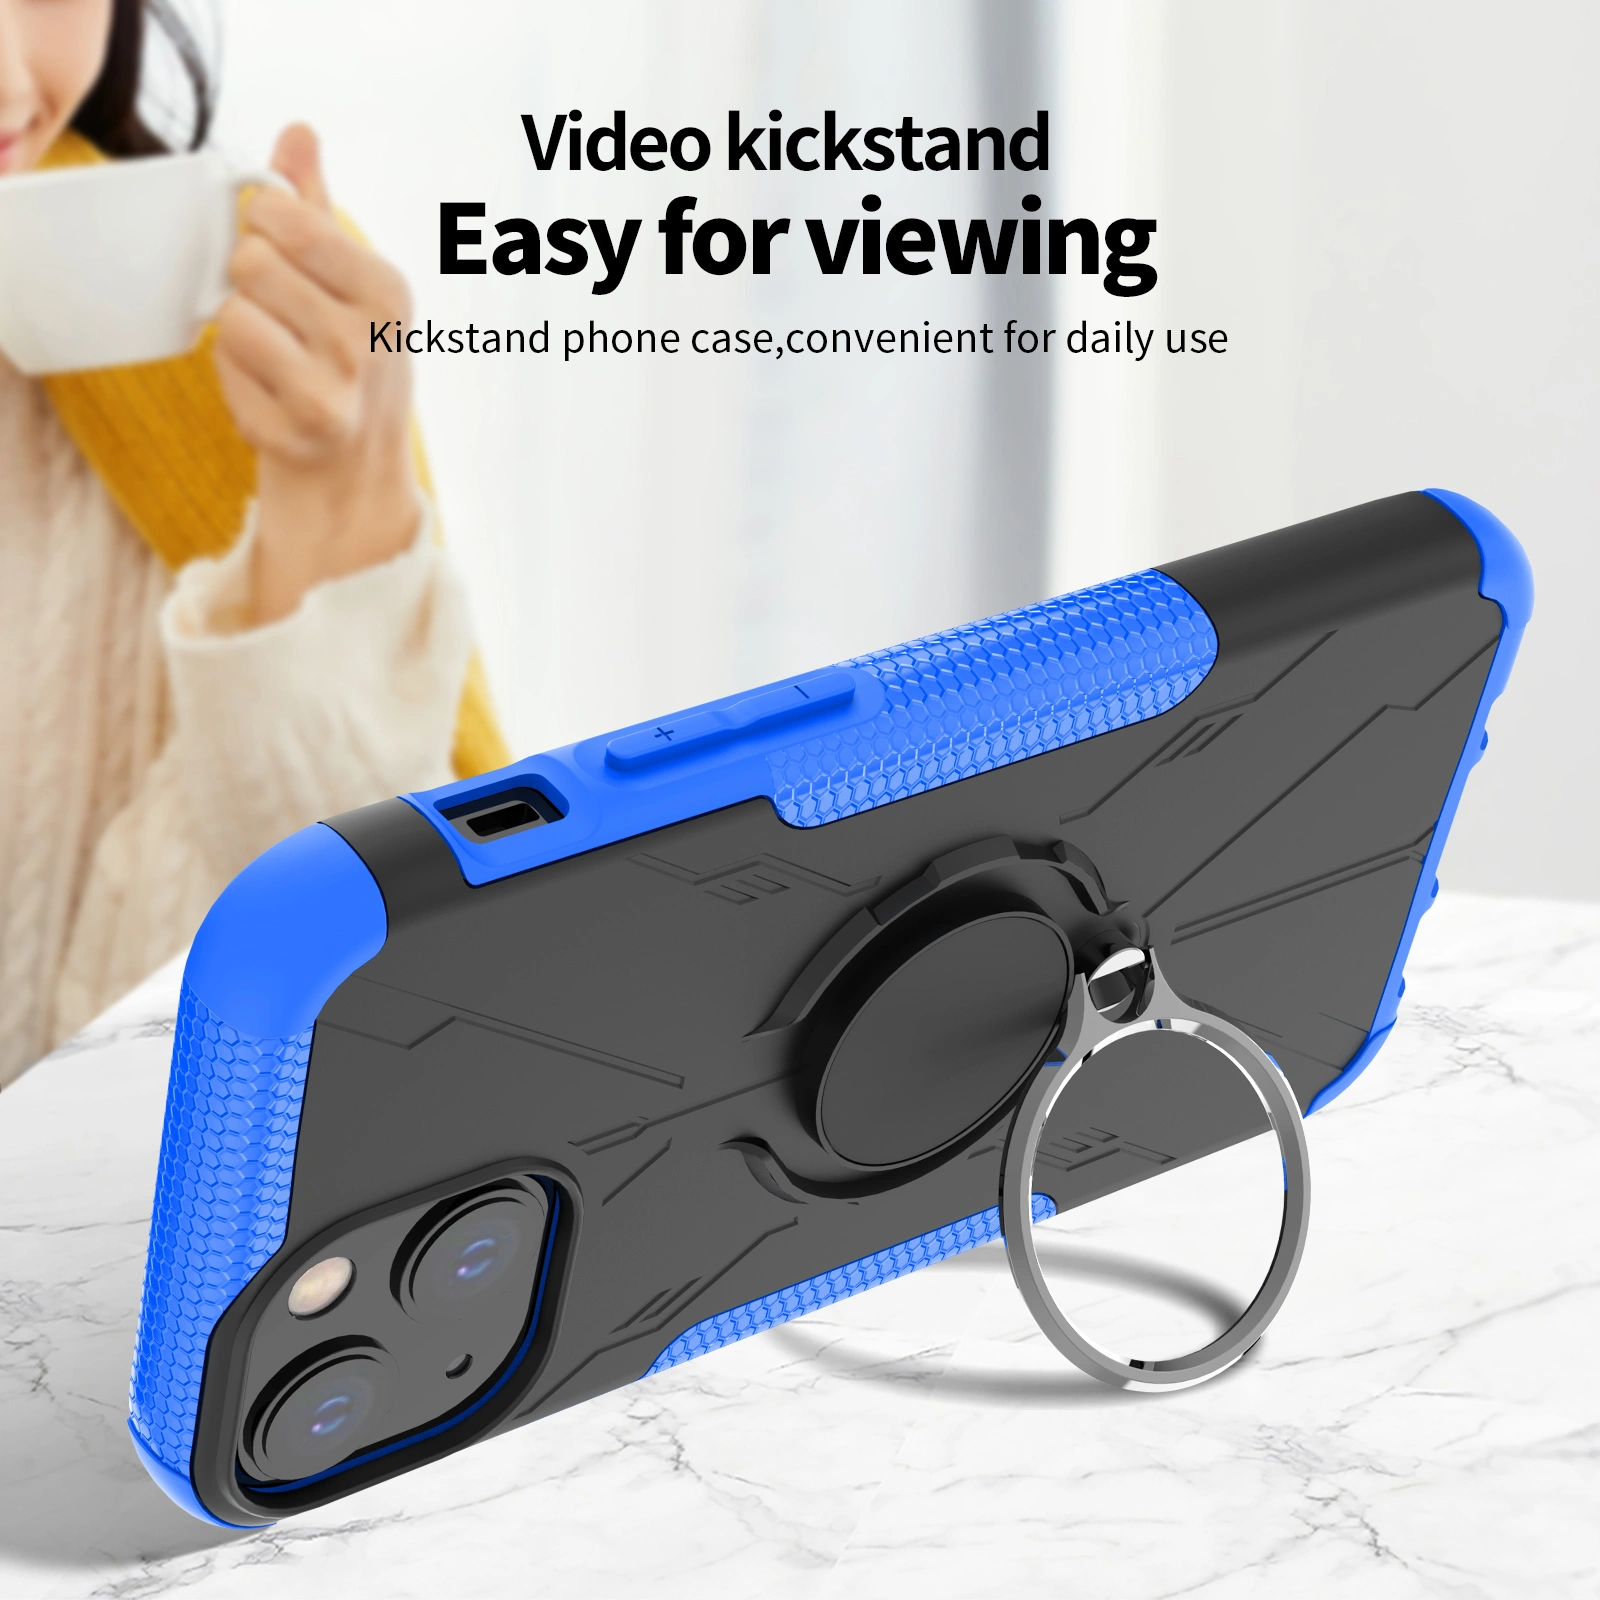 kickstand phone case,convenient for daily use